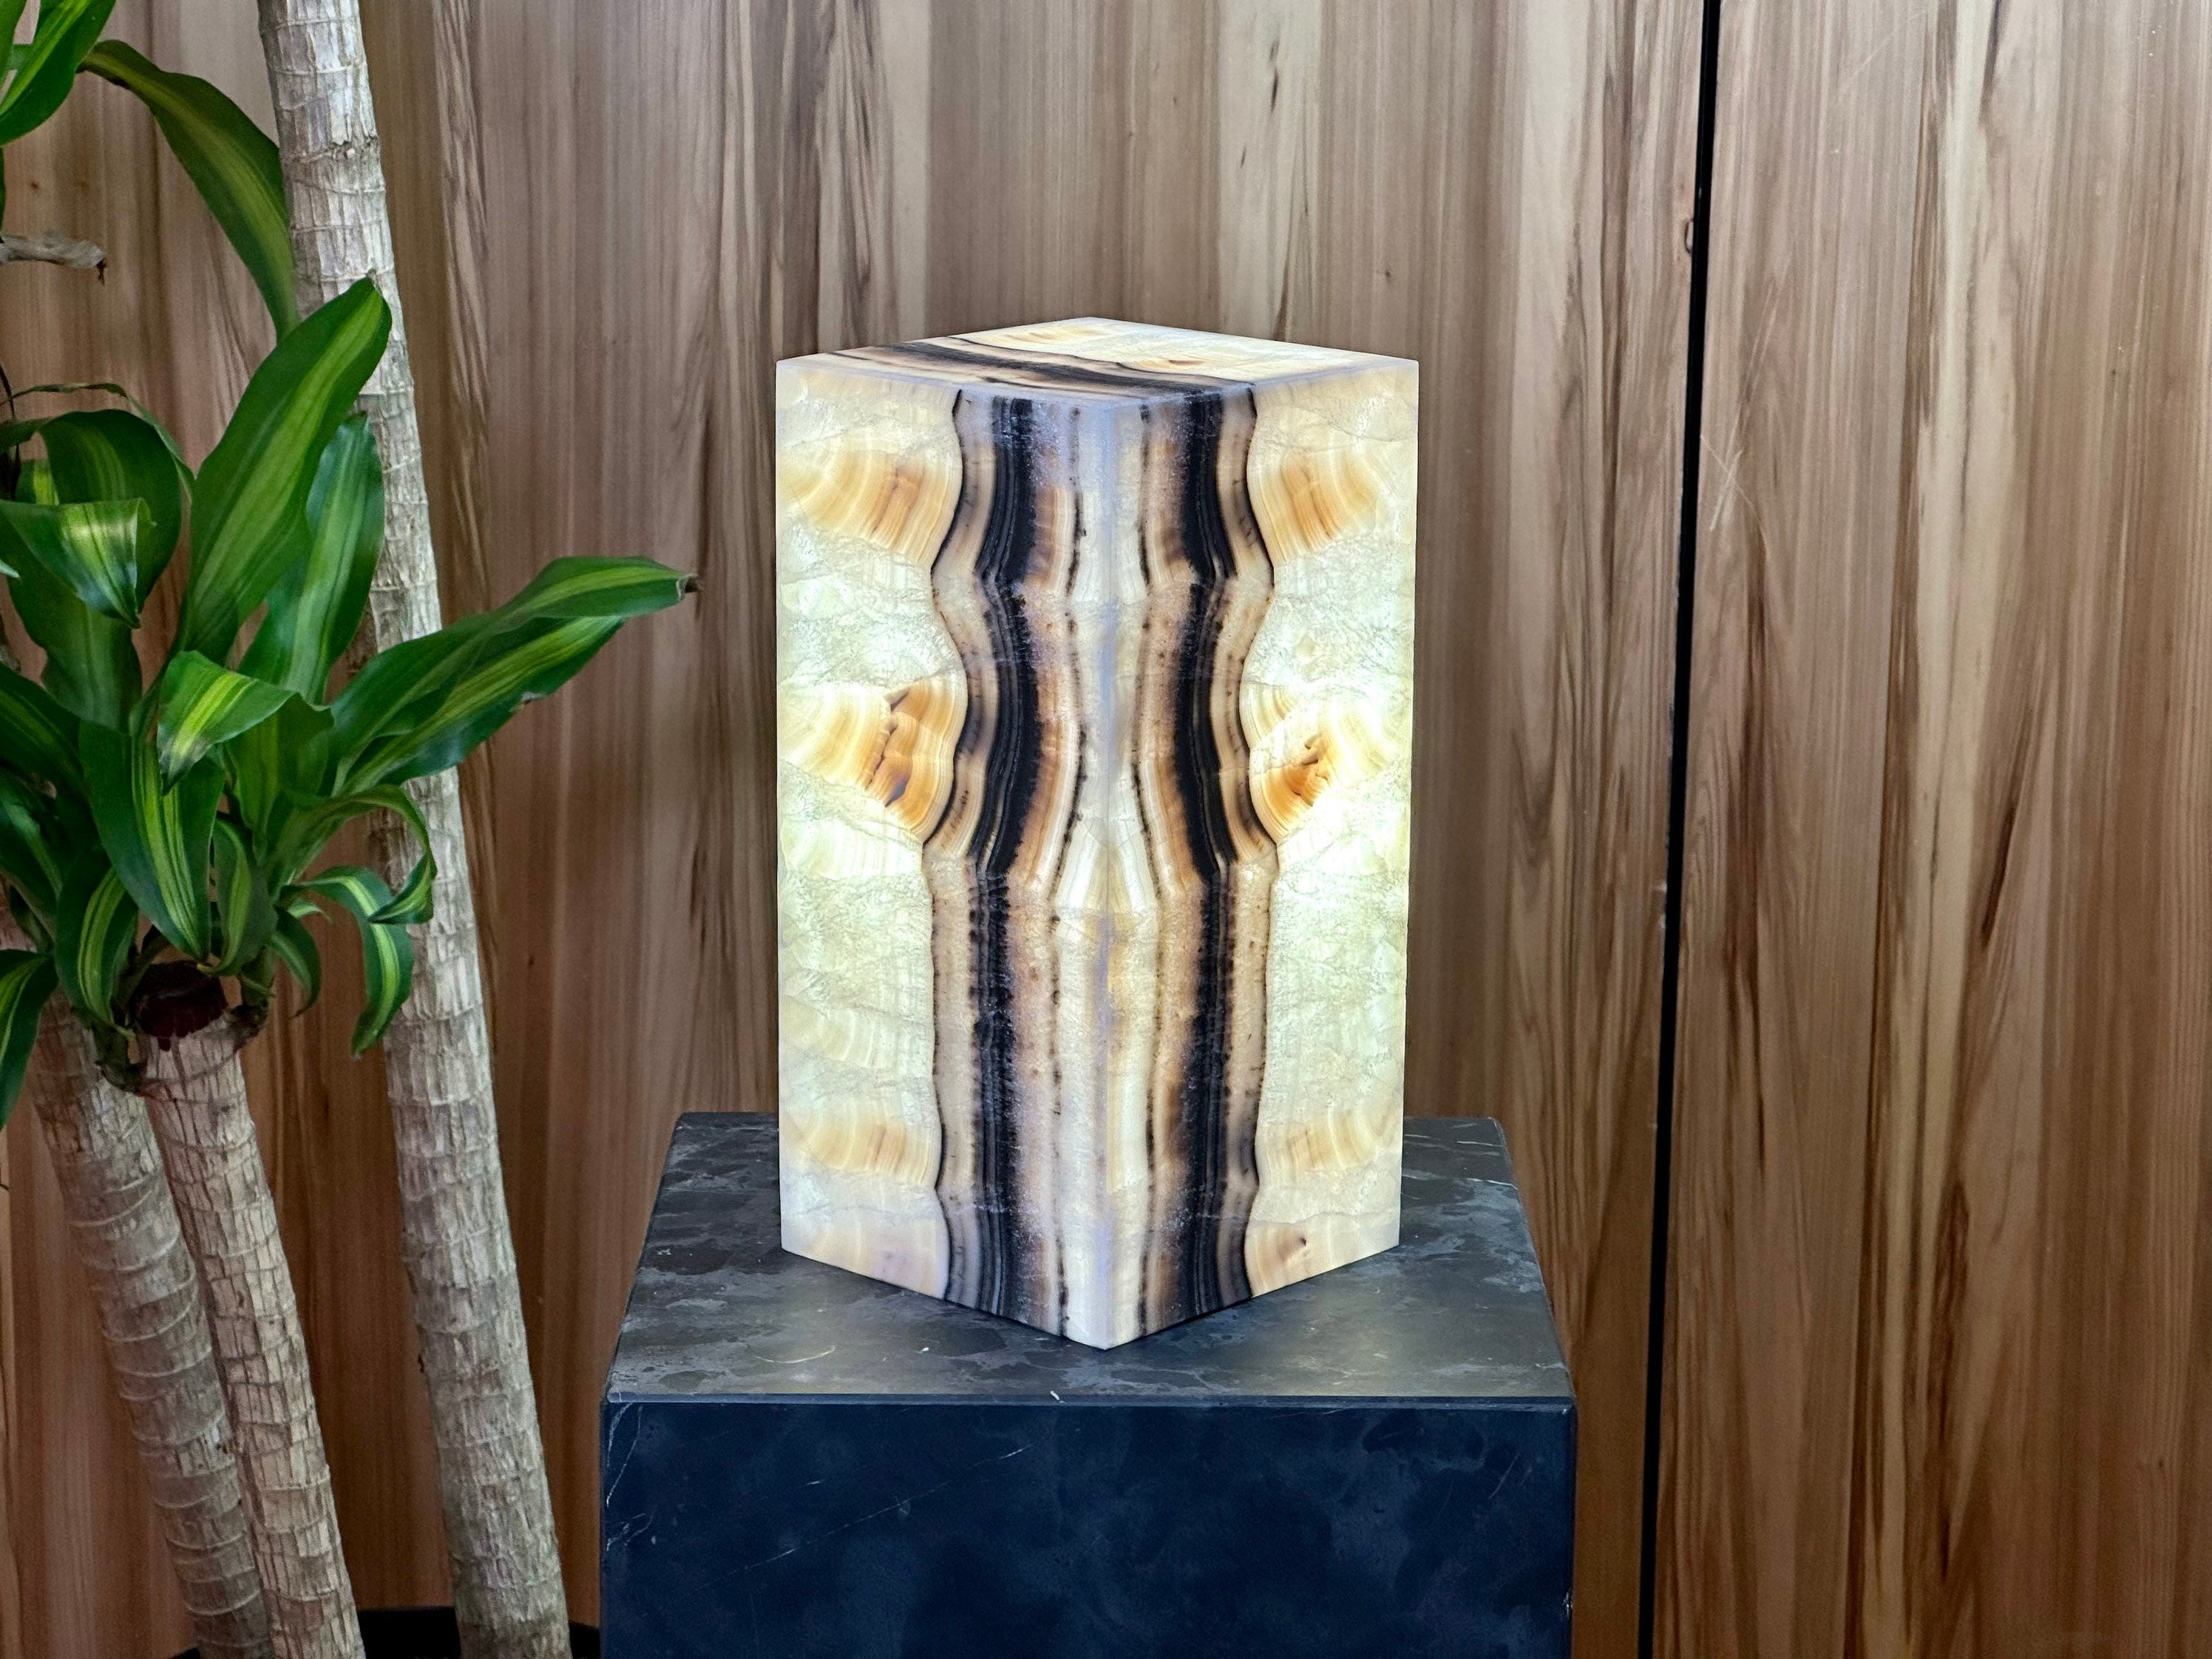 Artisanal Onyx Stone Table Lamp - This elegant Stone Table Lamp adds a touch of luxury to any space - Natural Onyx - Gifts